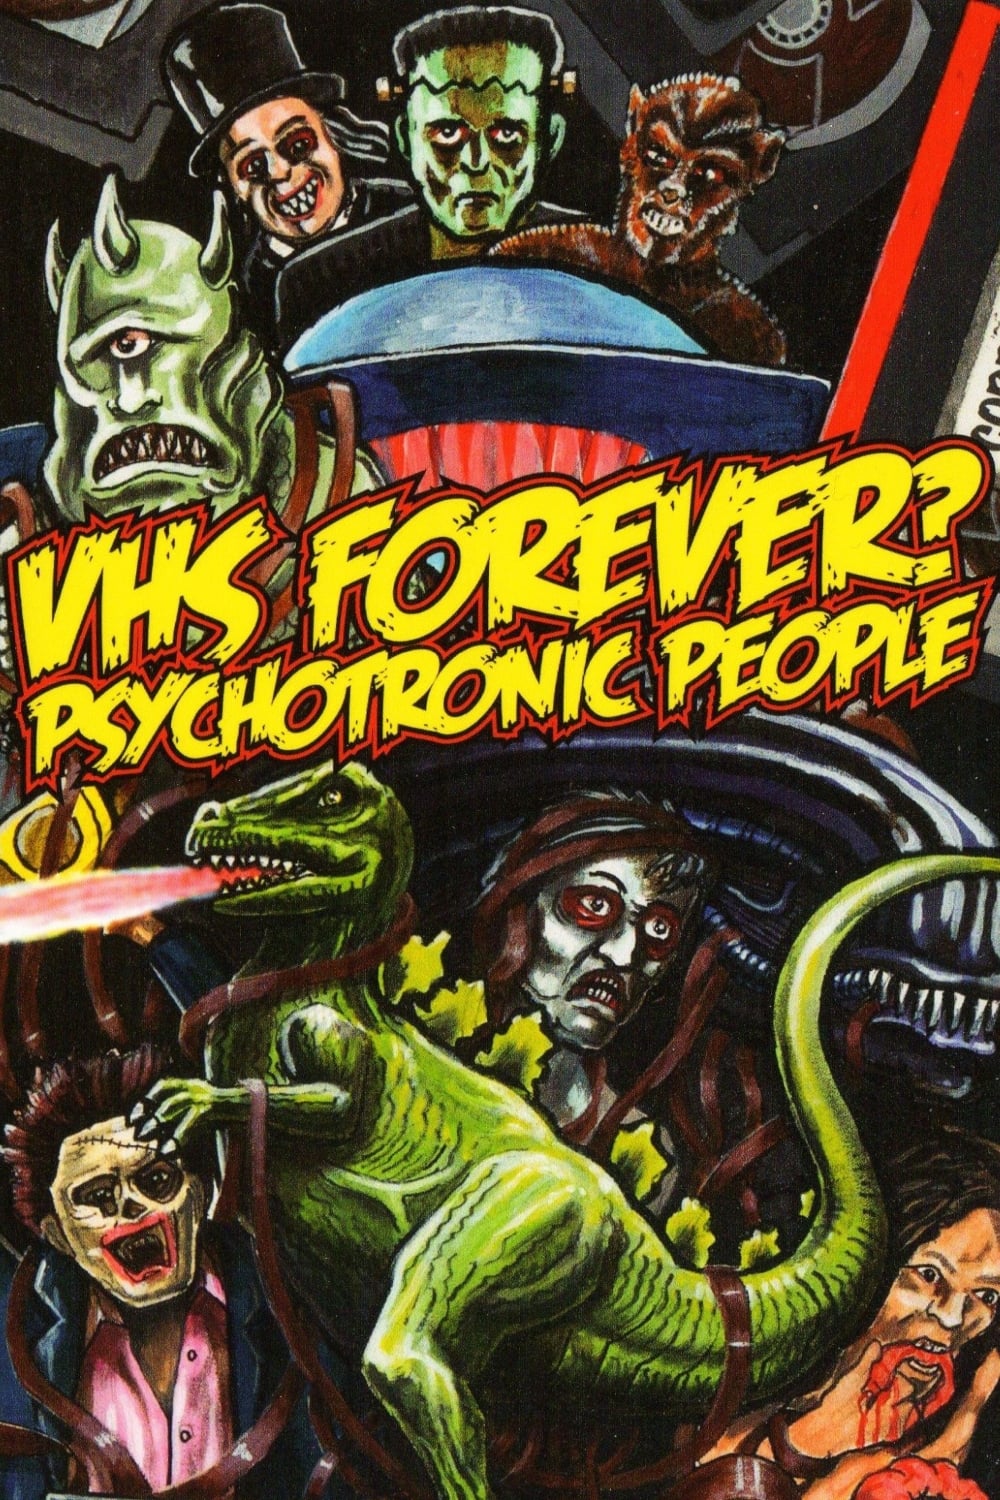 VHS Forever?: Psychotronic People (2014)